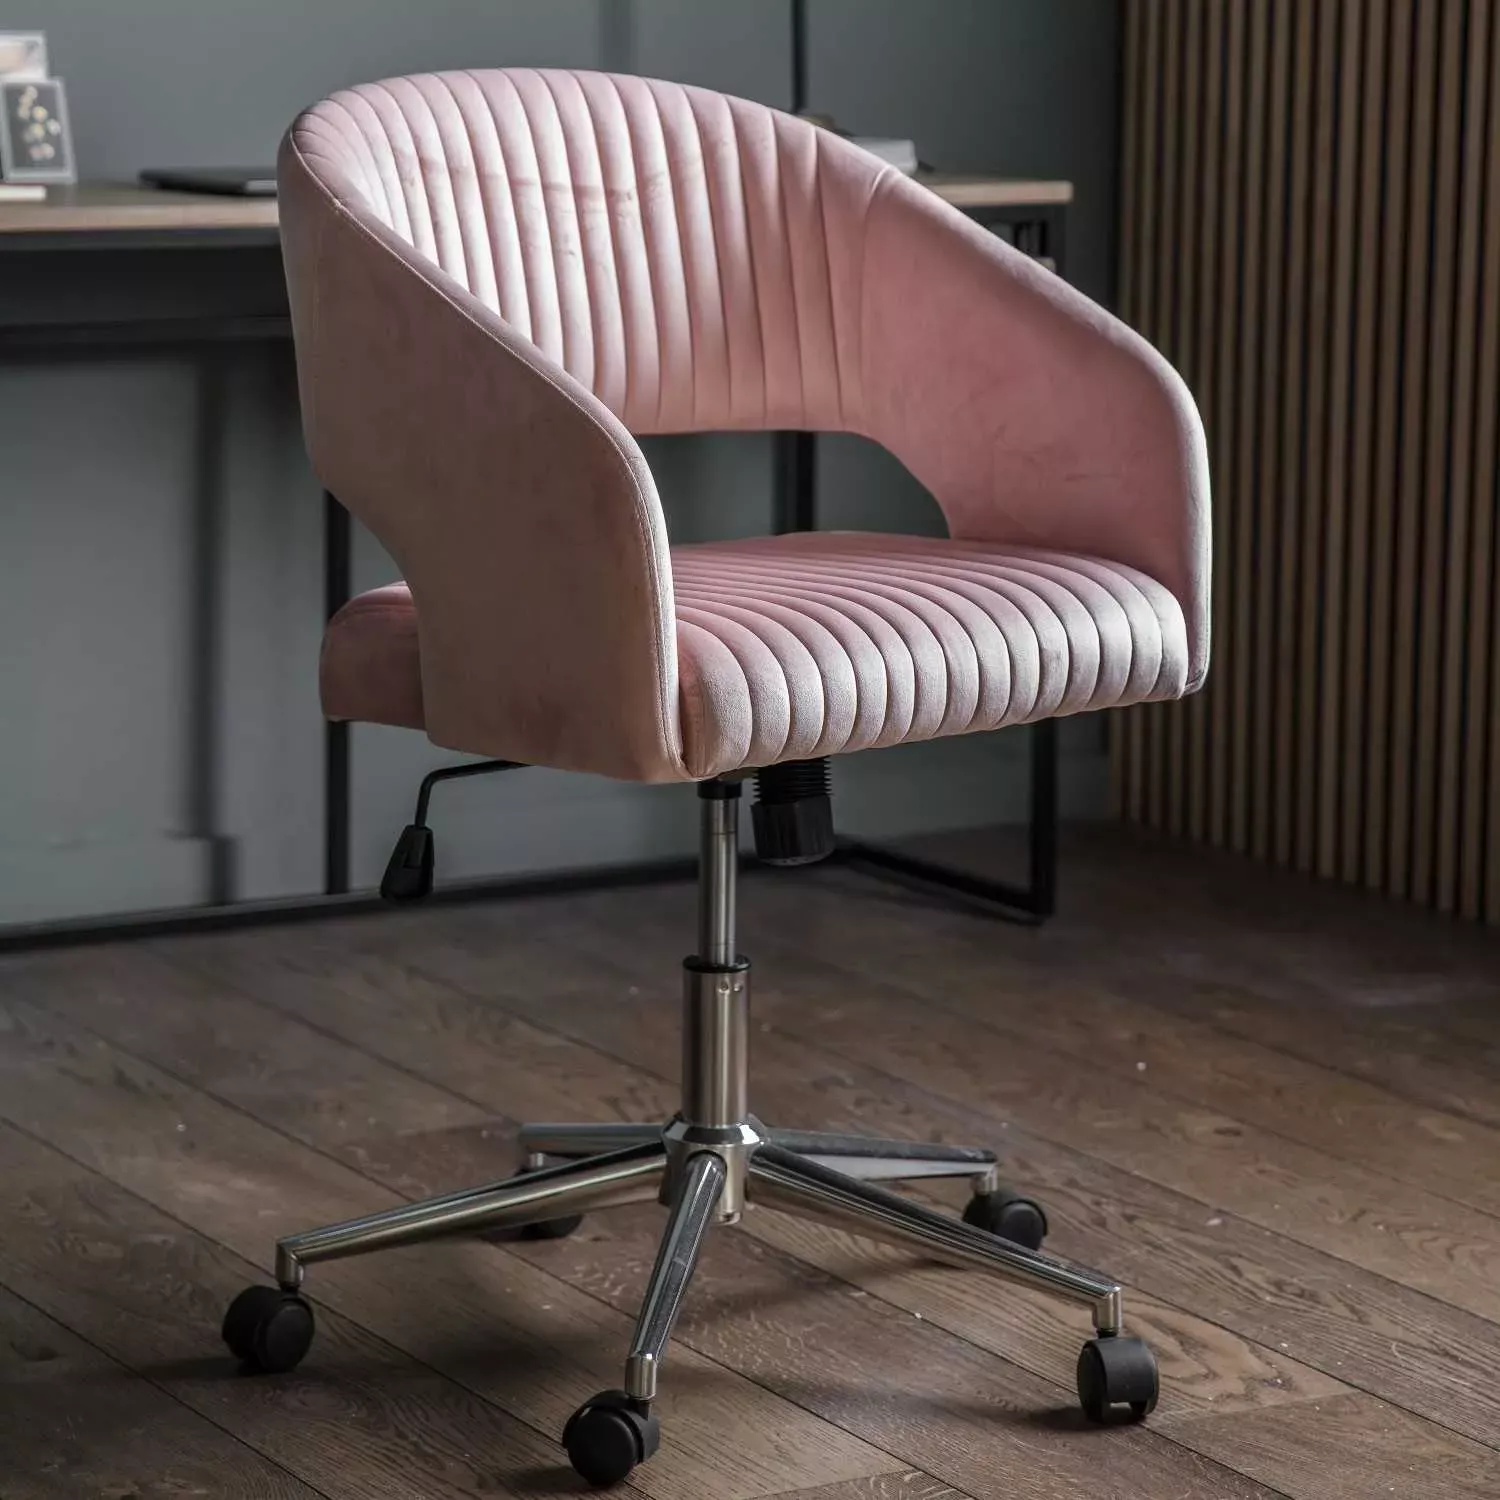 Add a Touch of Elegance to Your Workspace with a Modern Pink Office Chair